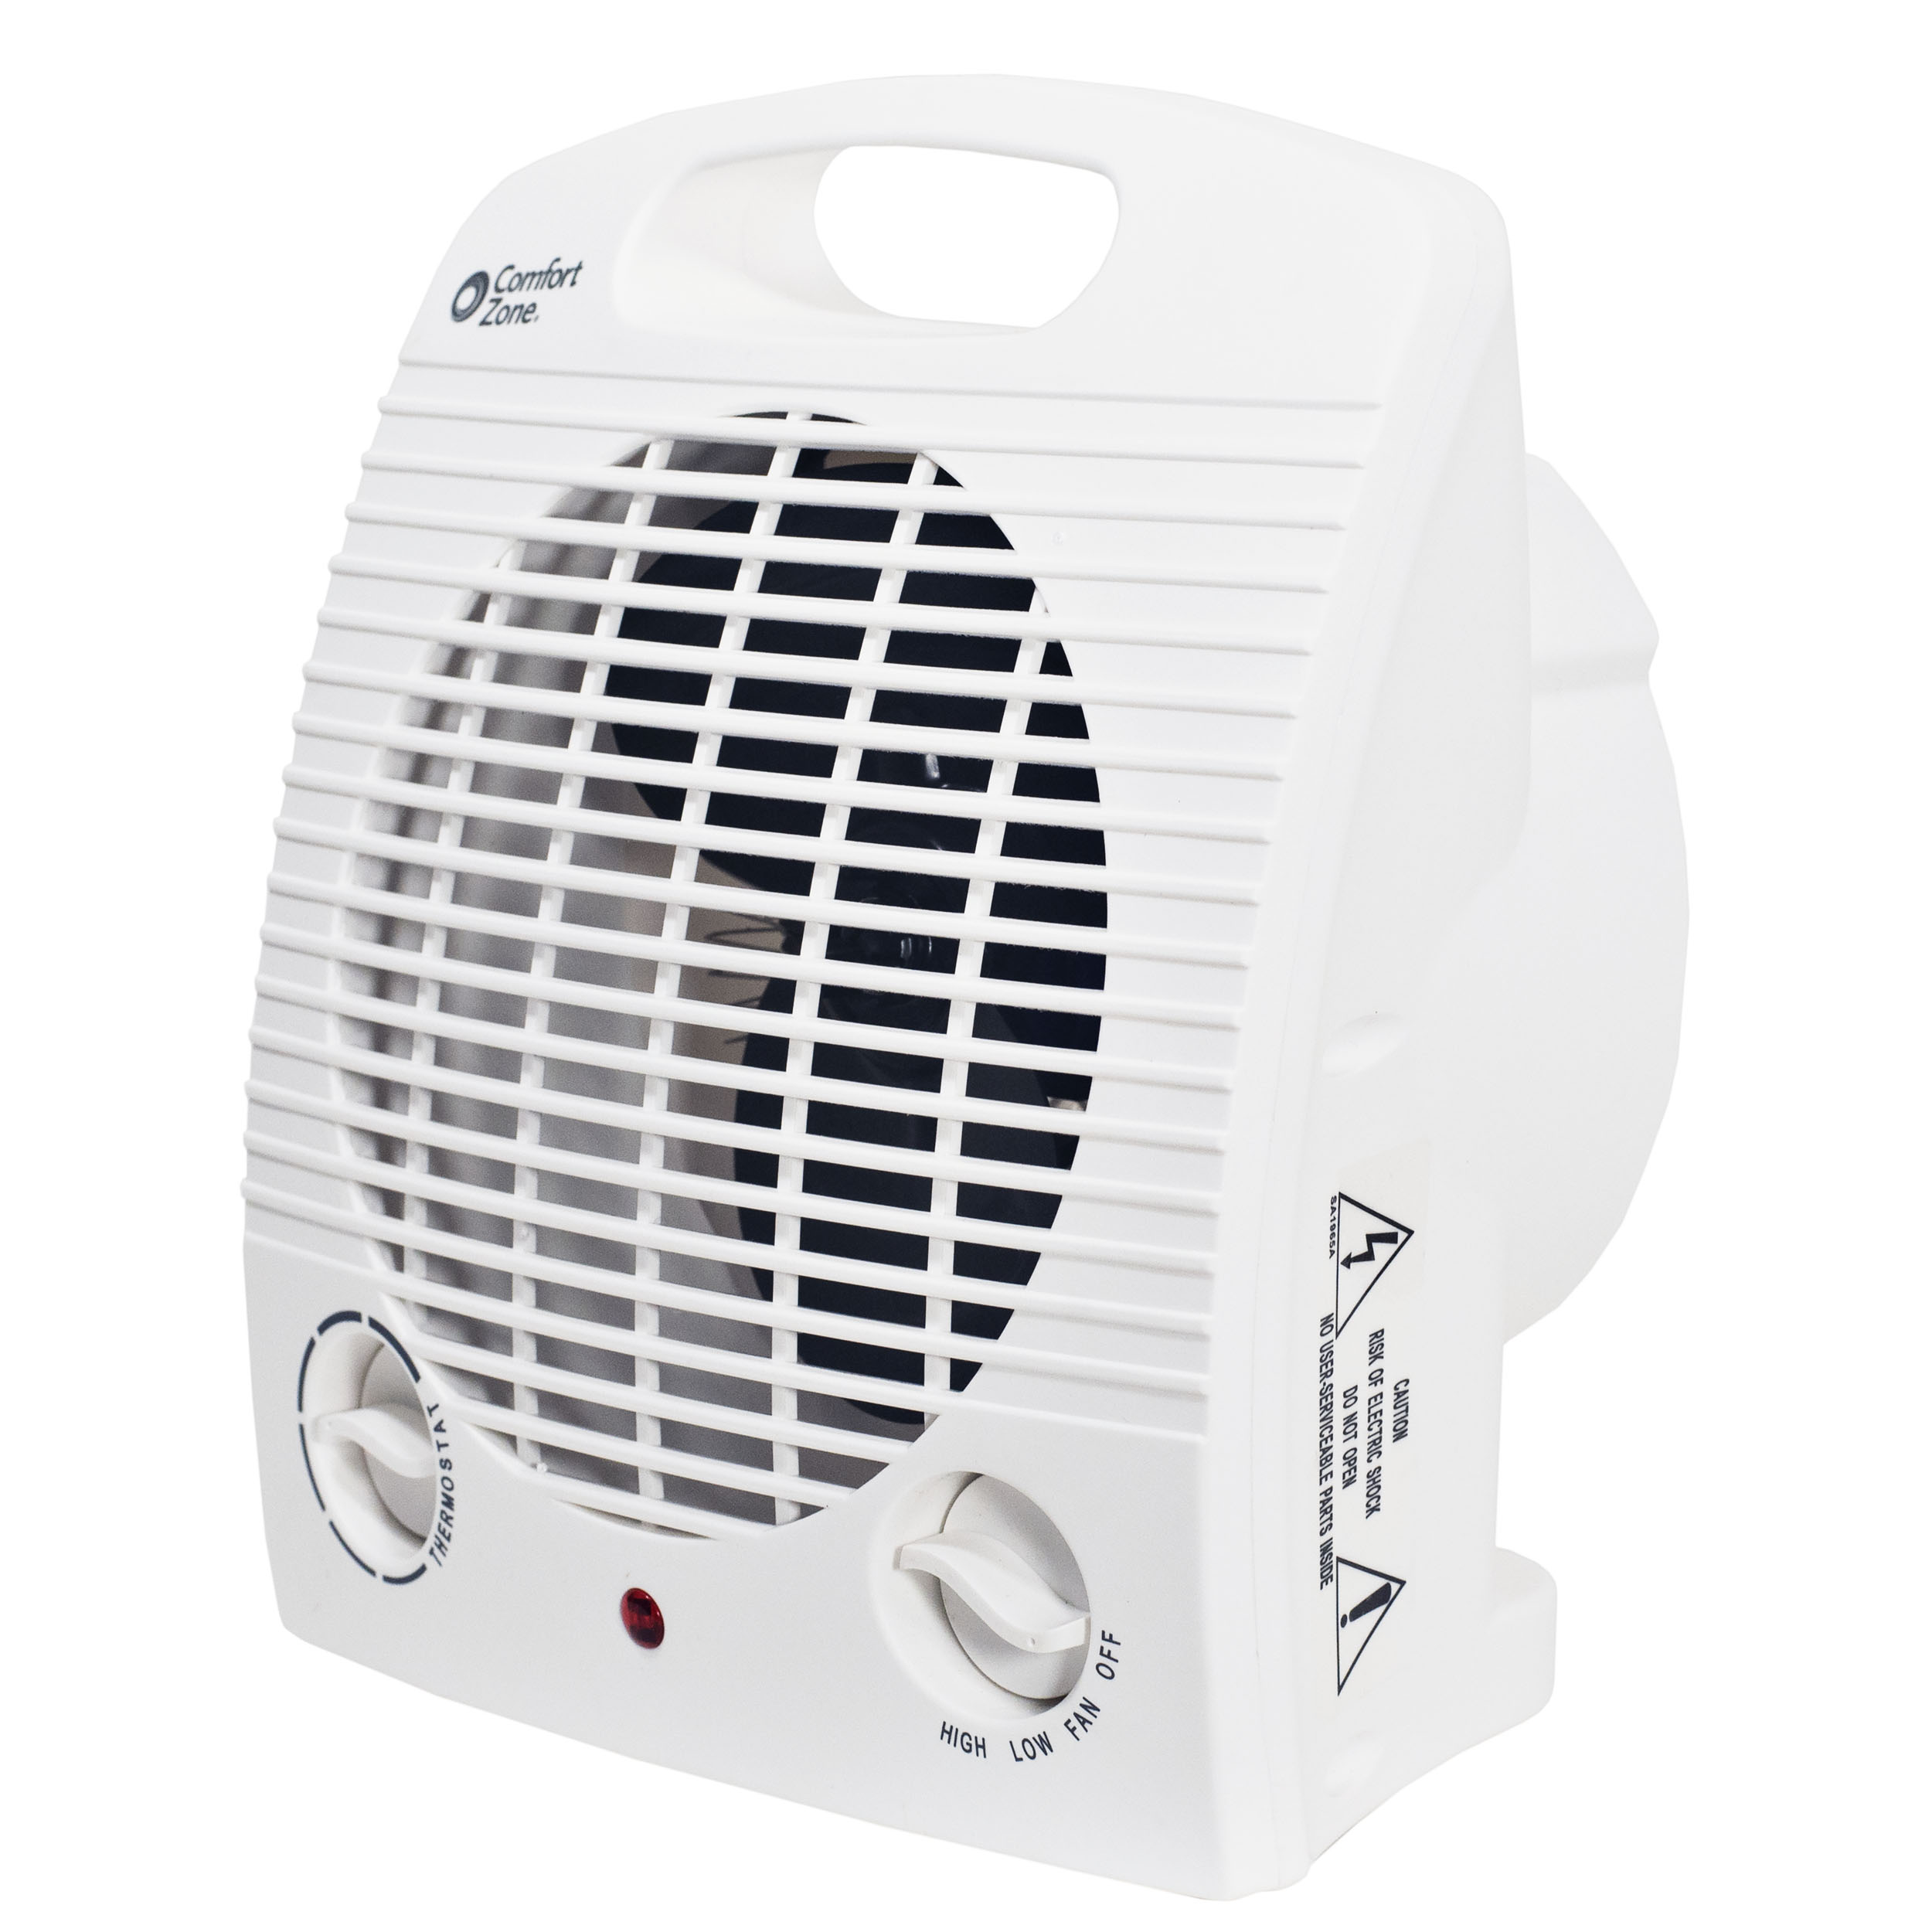 Comfort Zone 750/1,500-Watt Portable Compact Space Heater with Thermostat, White - image 1 of 7